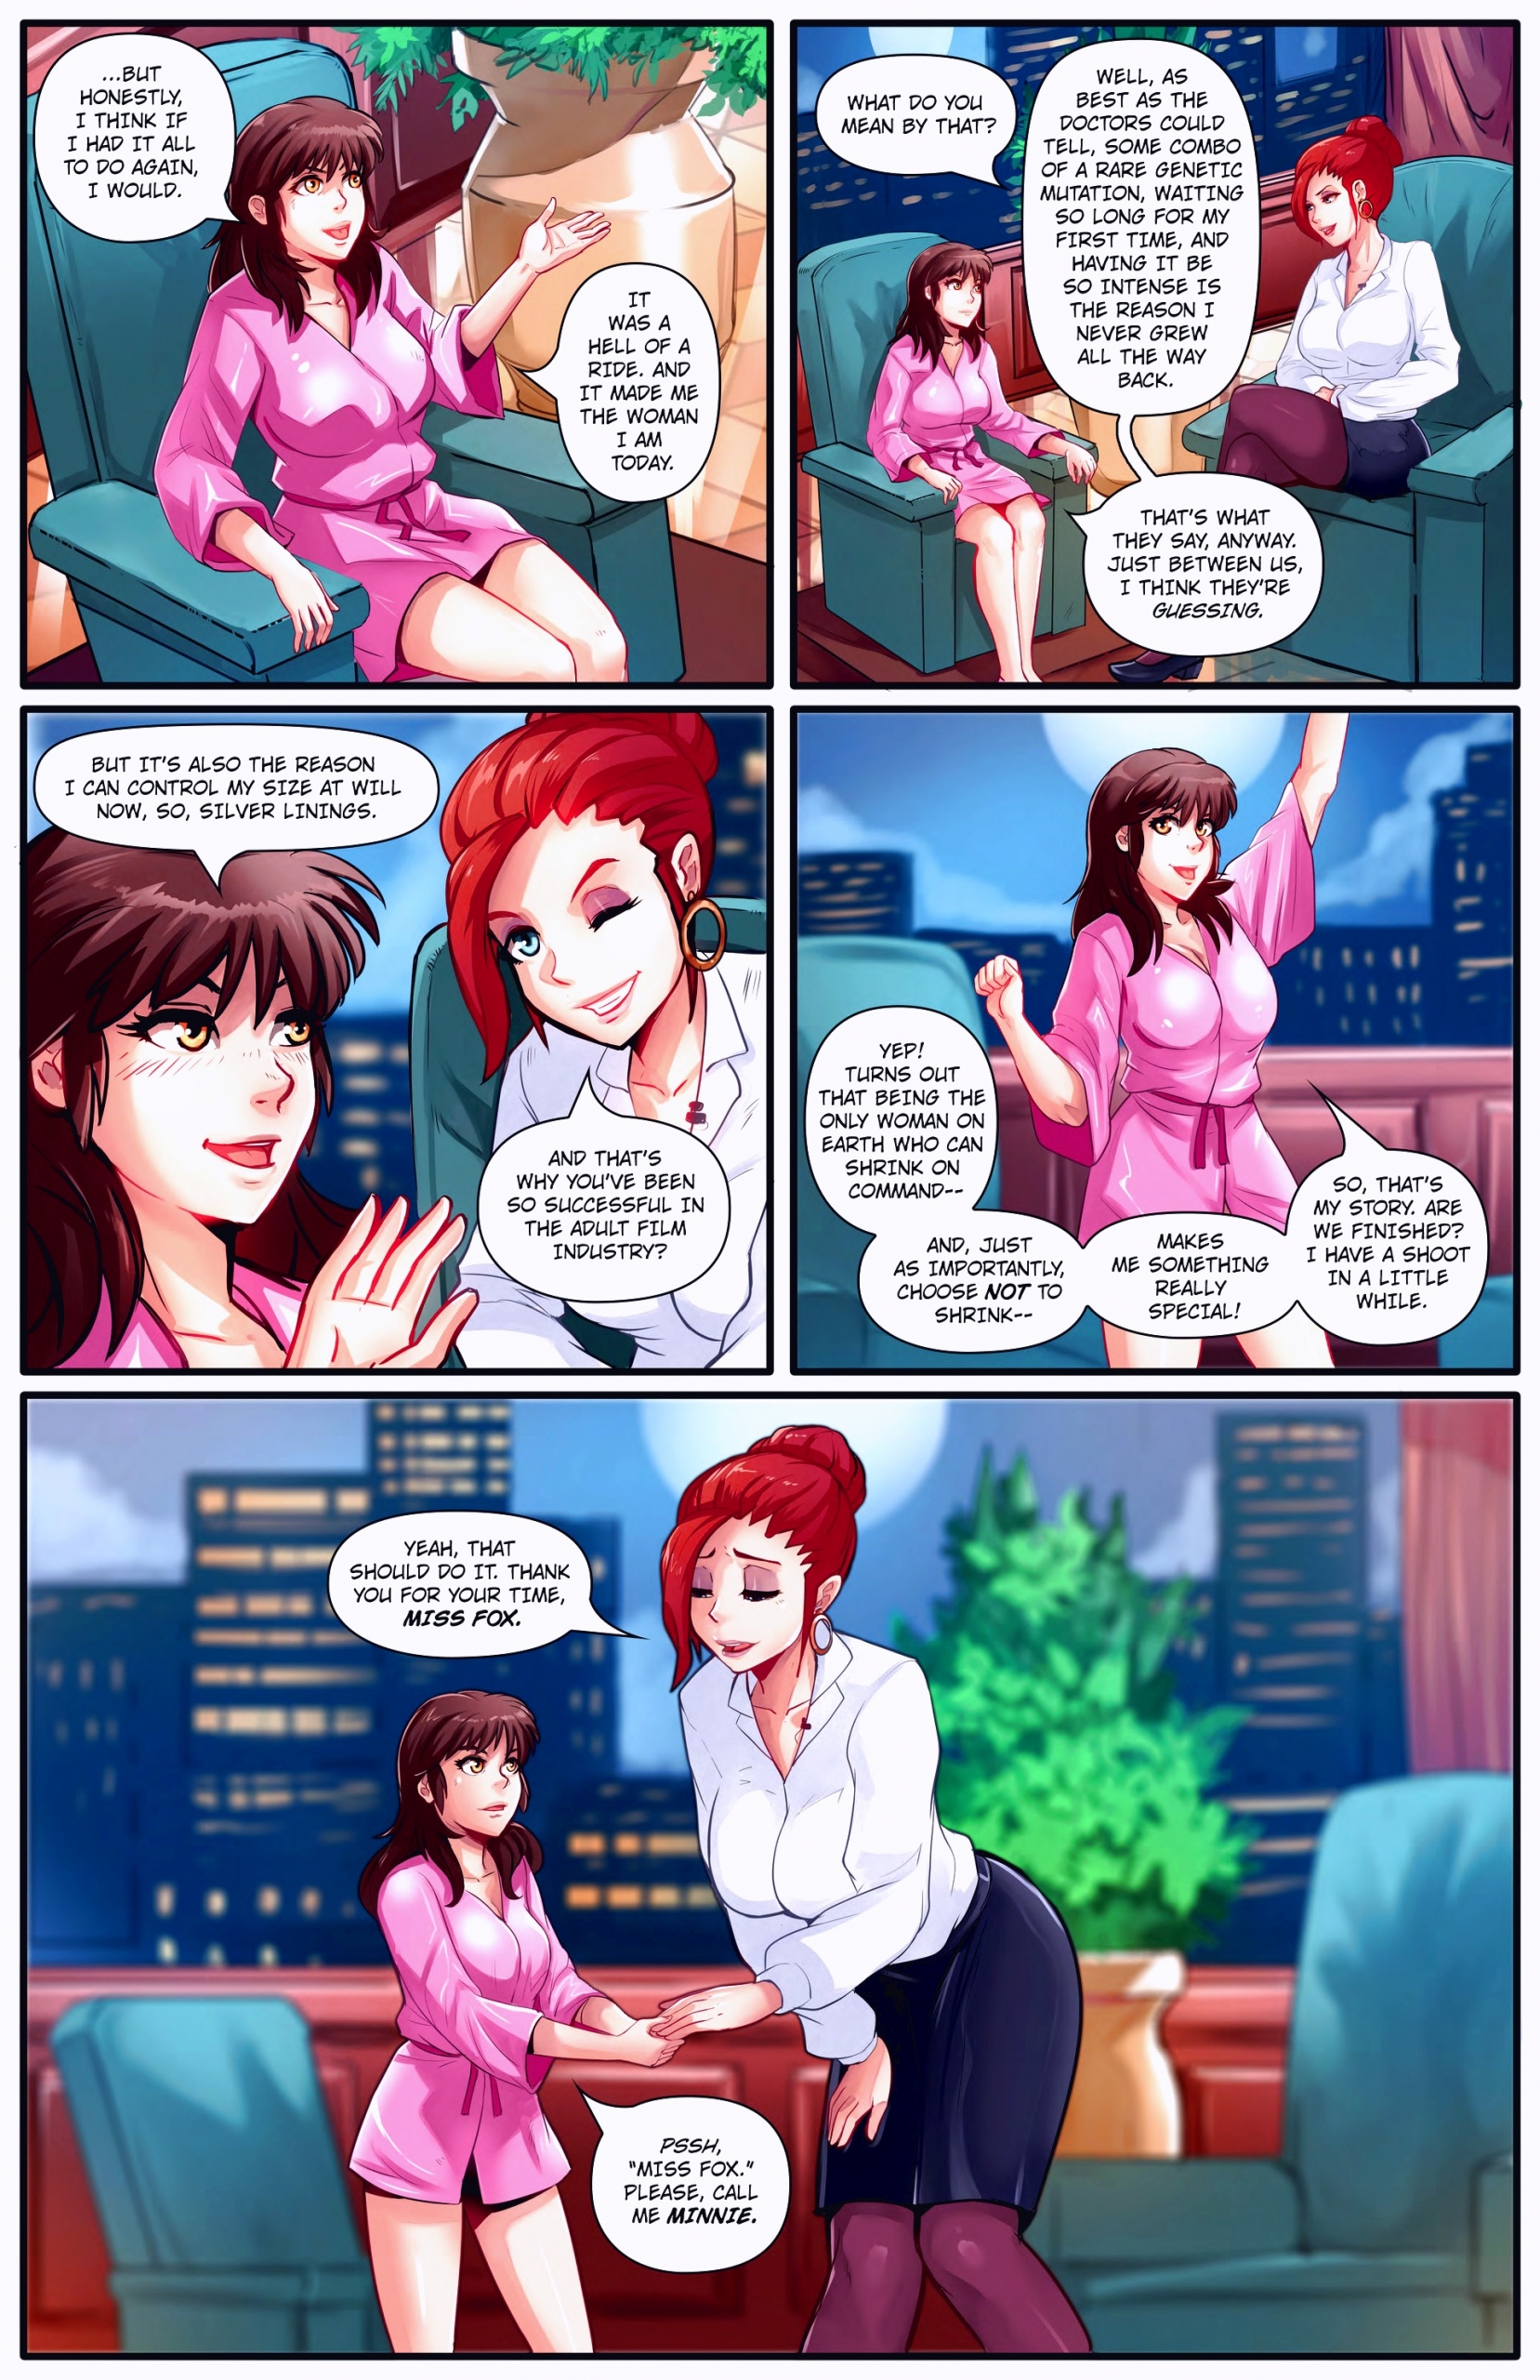 The Invisible Girl - chapters 1-2 [Shrink Fan Comics]